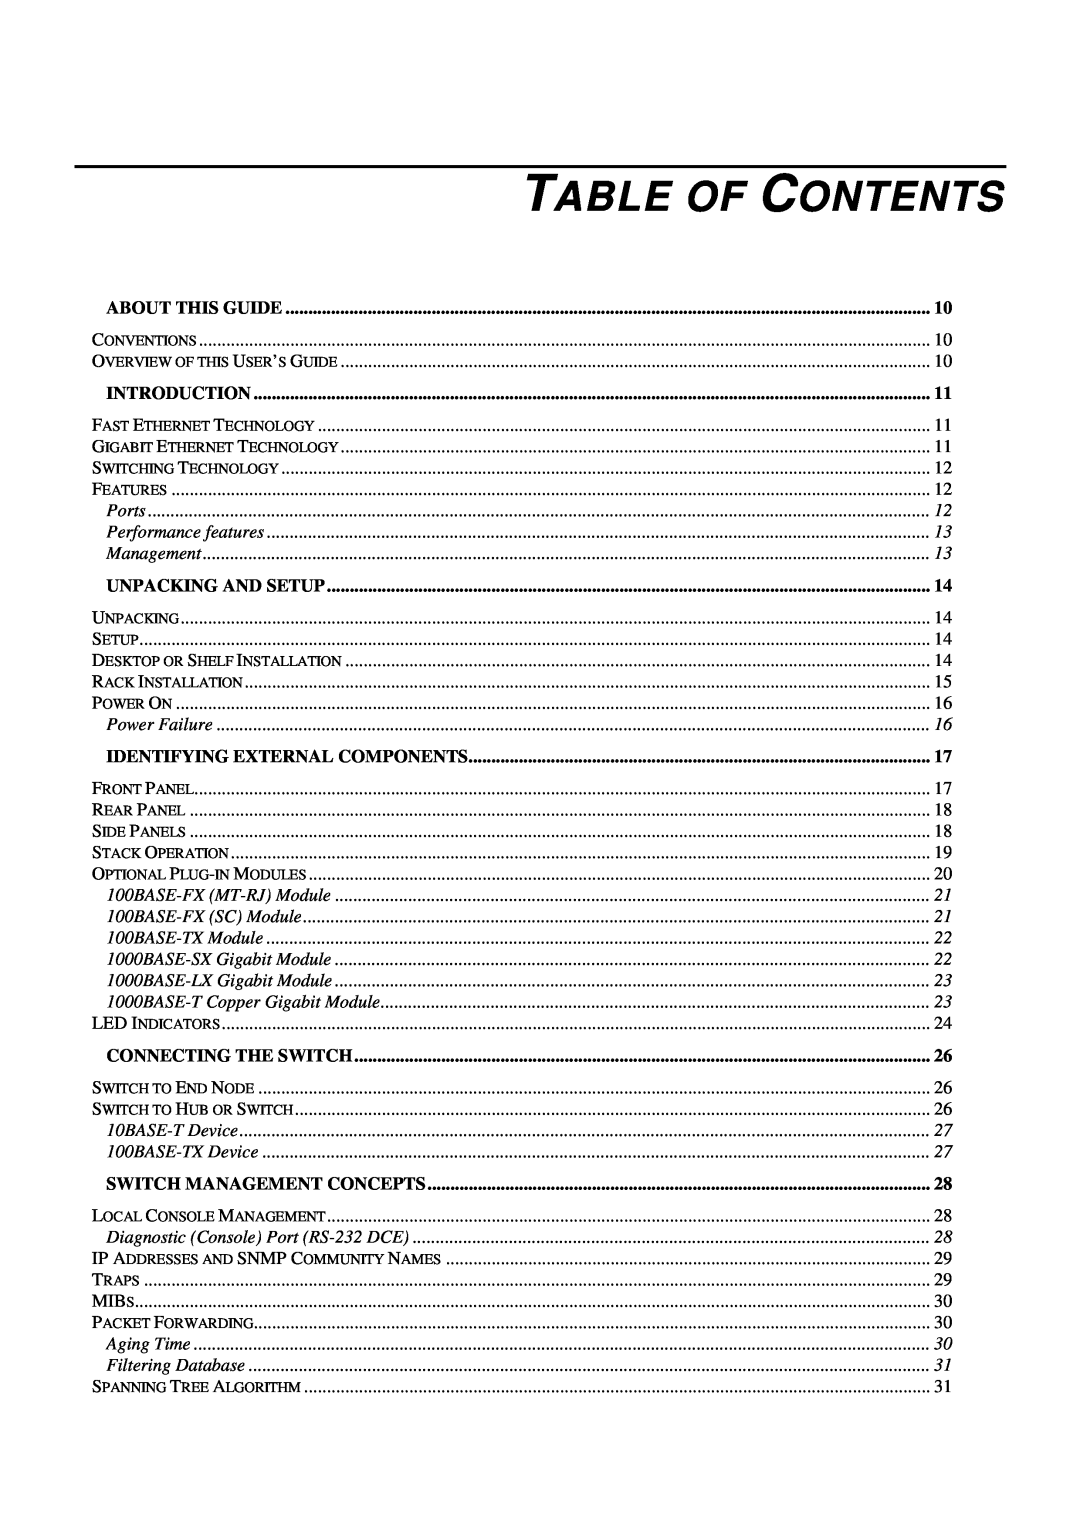 D-Link DES-3624 Table Of Contents, About This Guide, Introduction, Unpacking And Setup, Identifying External Components 